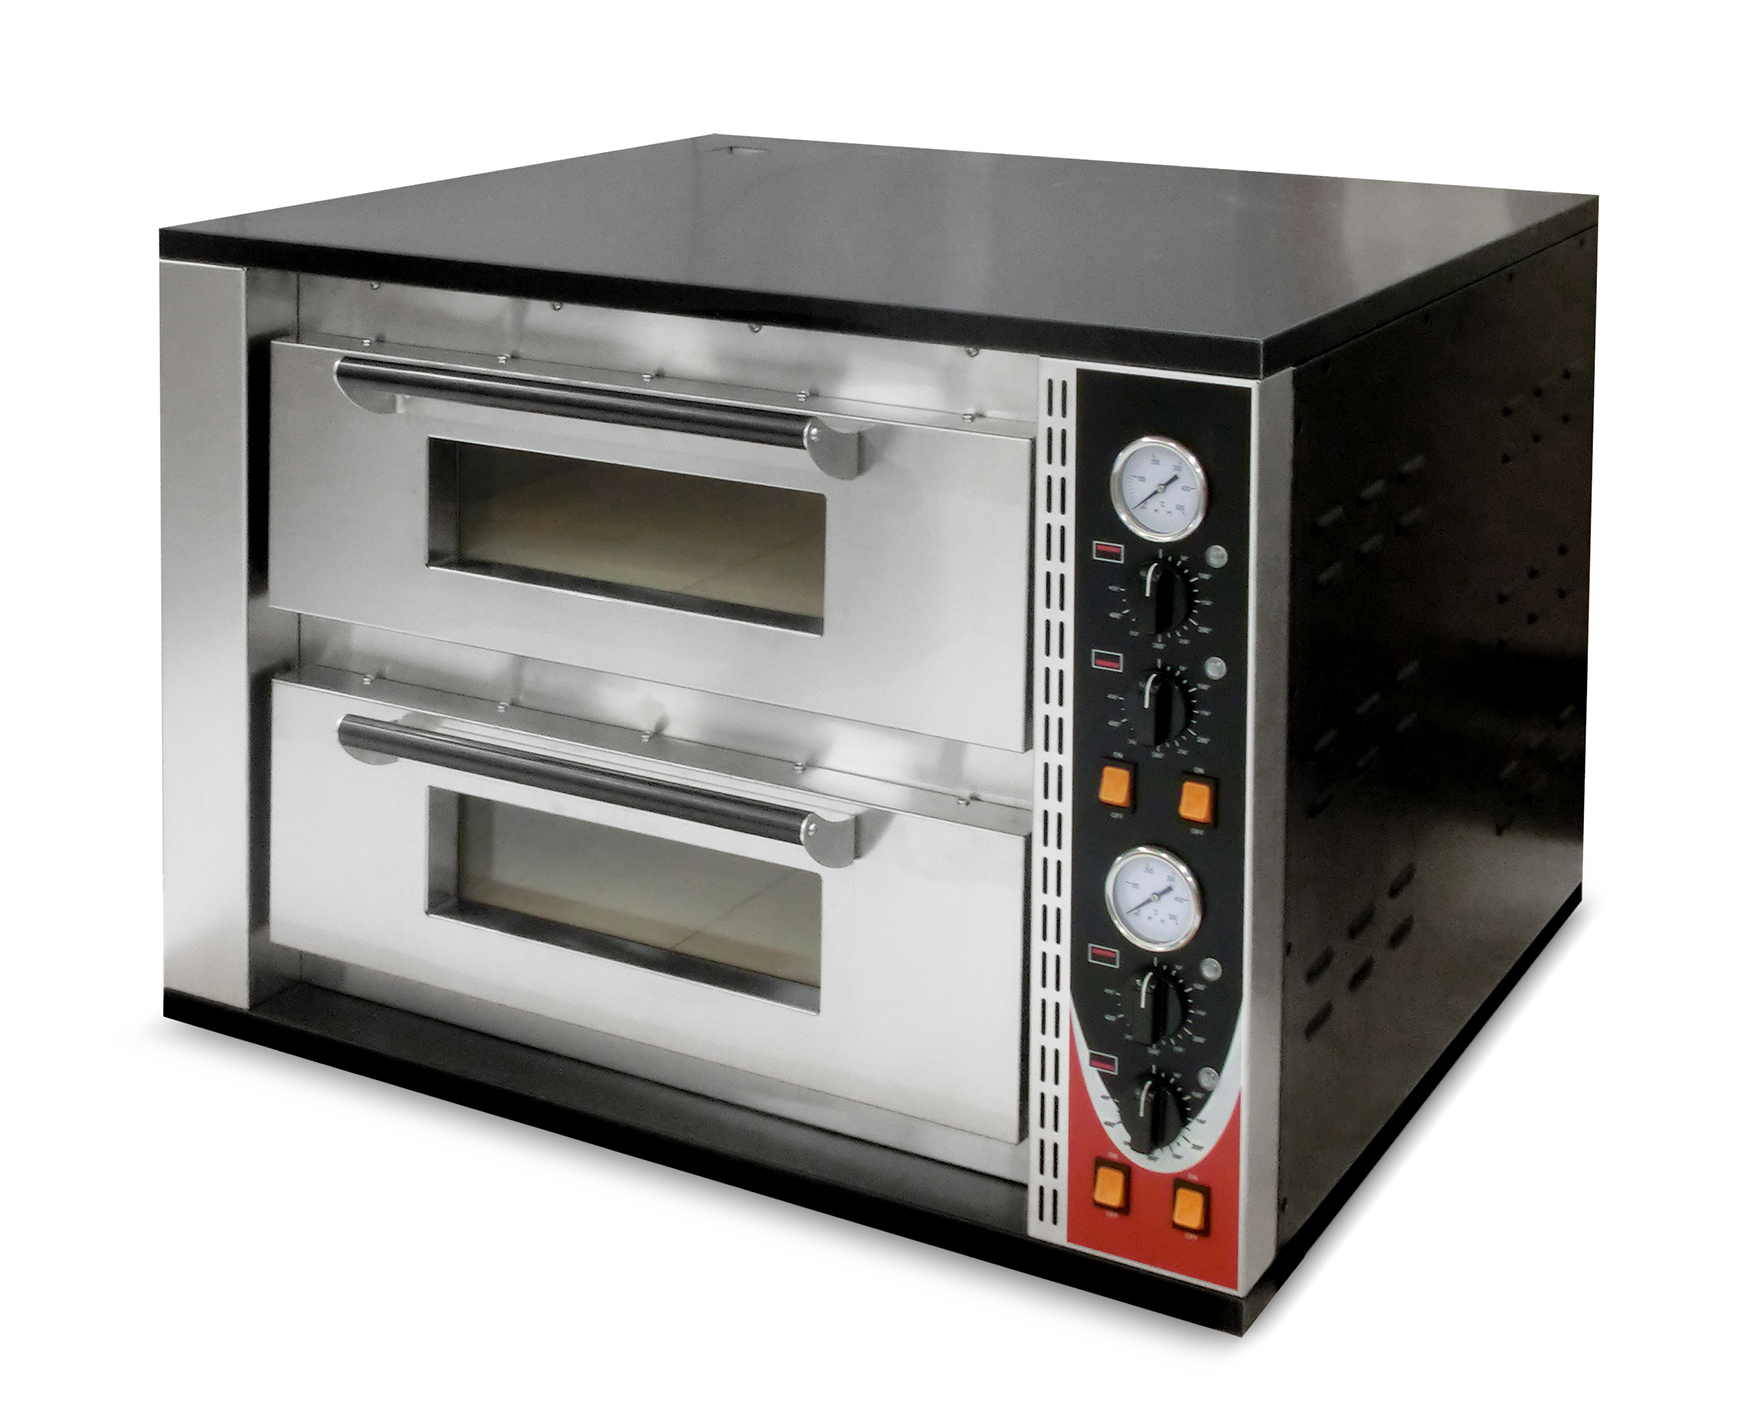 The New Sirman Lipari Pizza Oven Is Available From FEM 